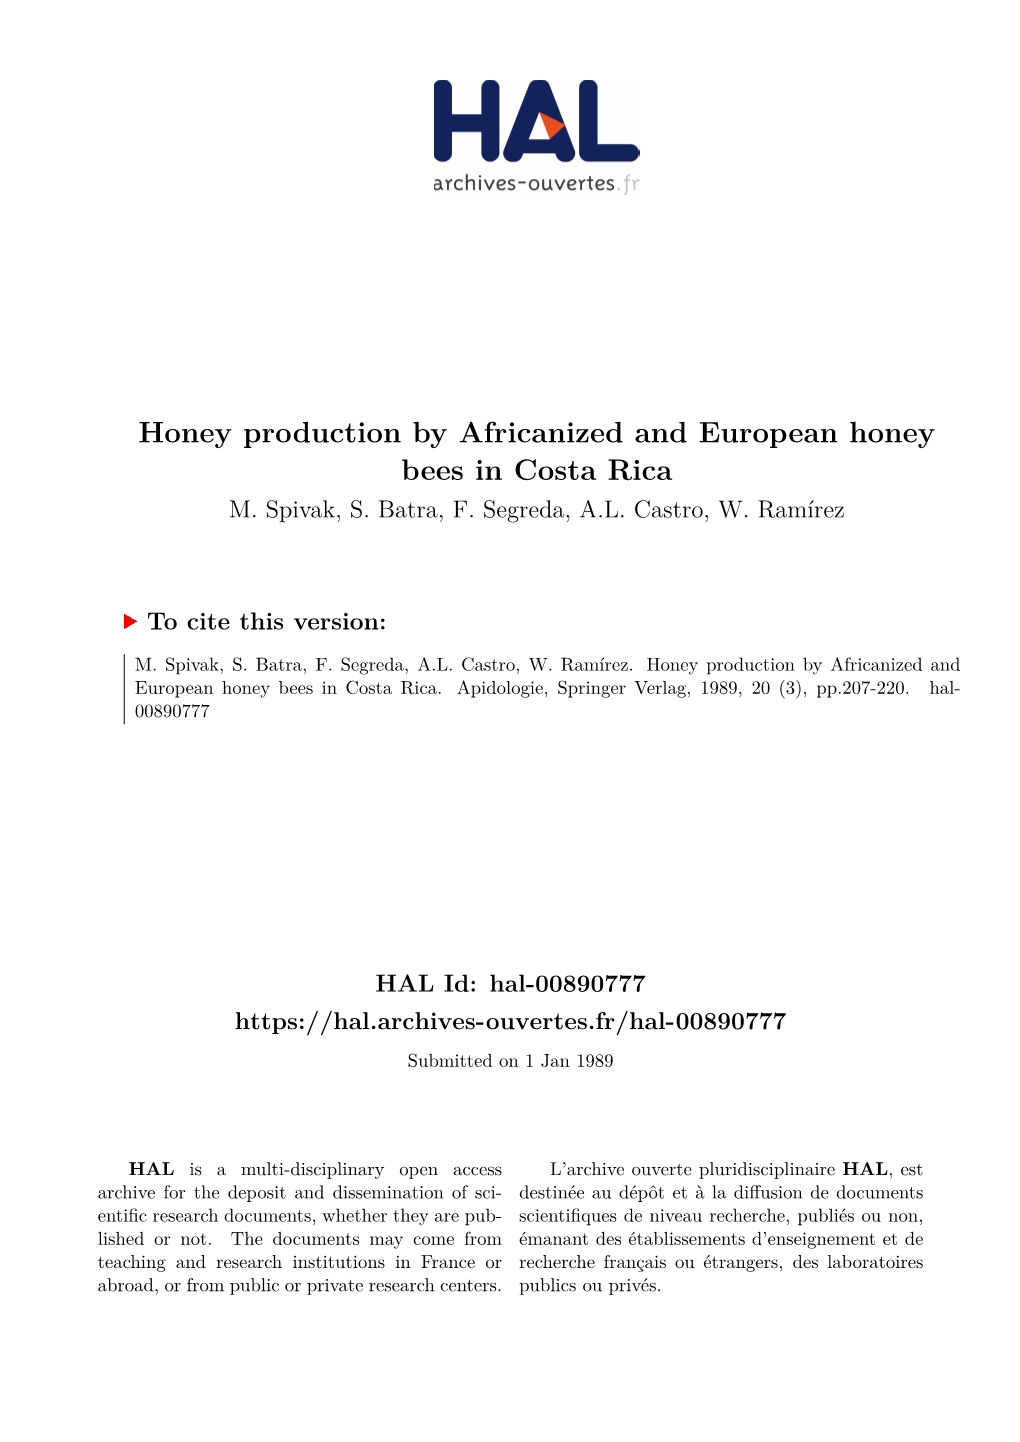 Honey Production by Africanized and European Honey Bees in Costa Rica M